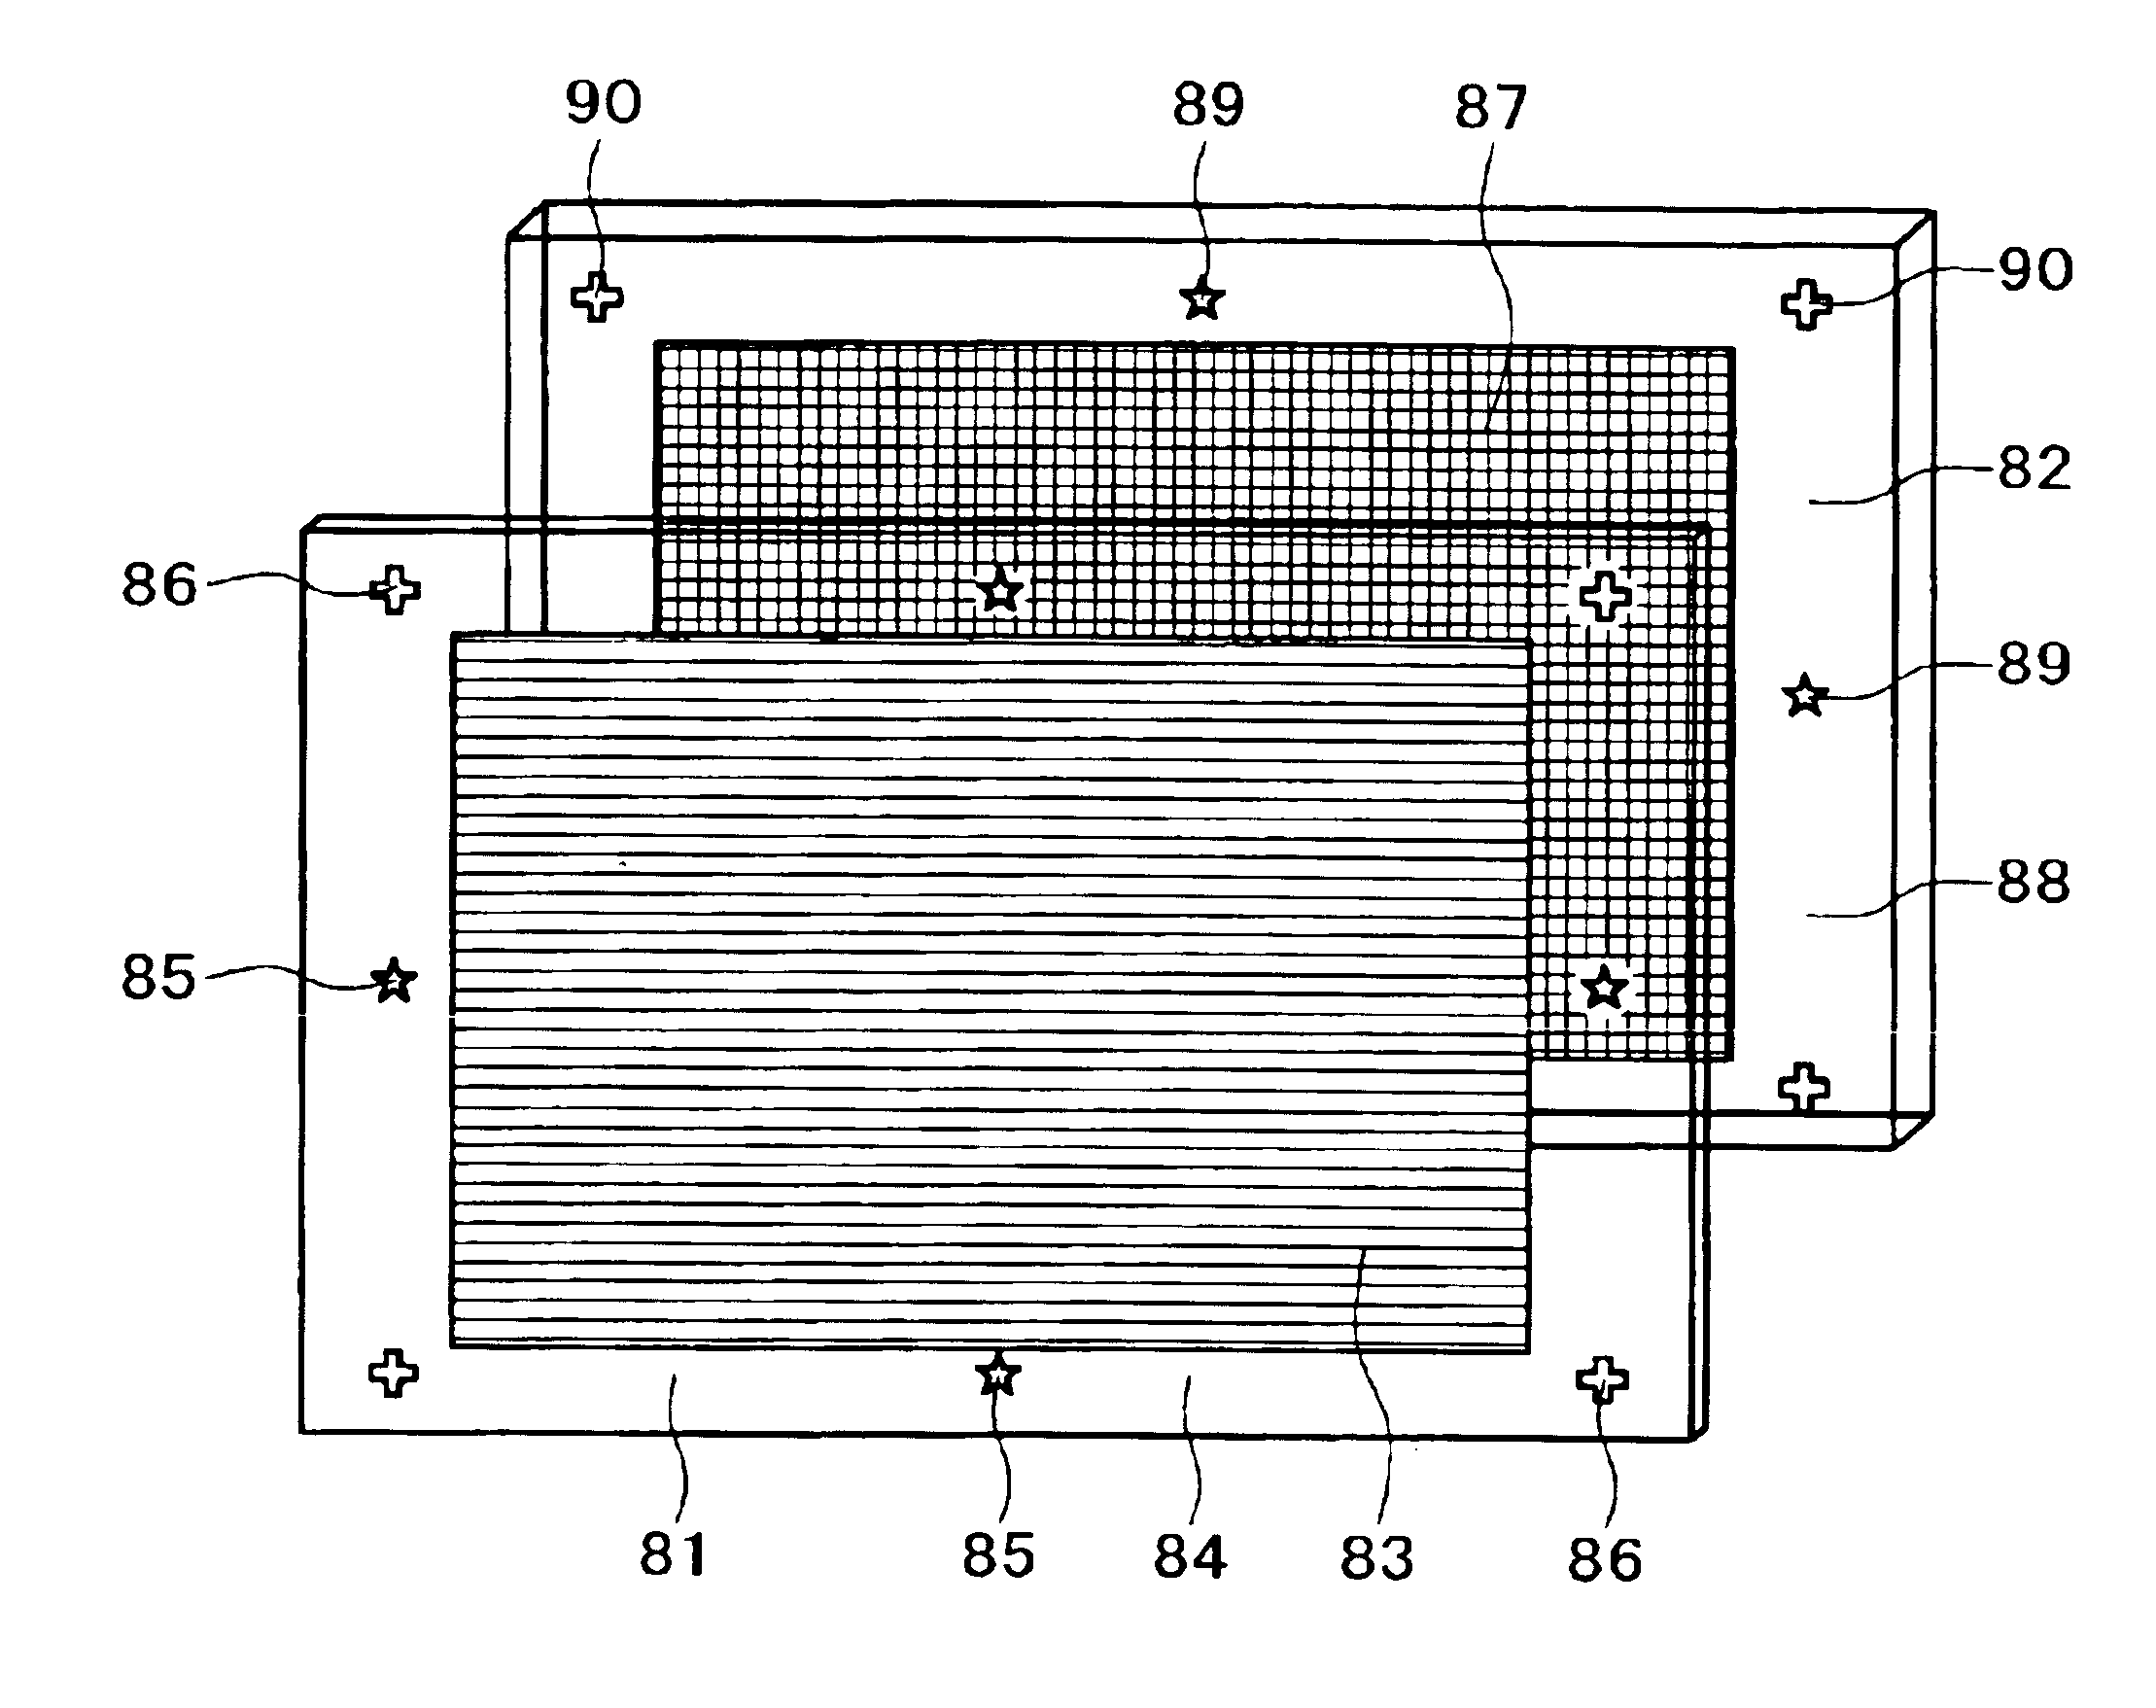 Stereoscopic image display apparatus, display apparatus, divided wave plate filter, plate-shared filter, and filter position adjusting mechanism attached to the display apparatus, aligning apparatus, filter position adjusting method, and filter aligning method